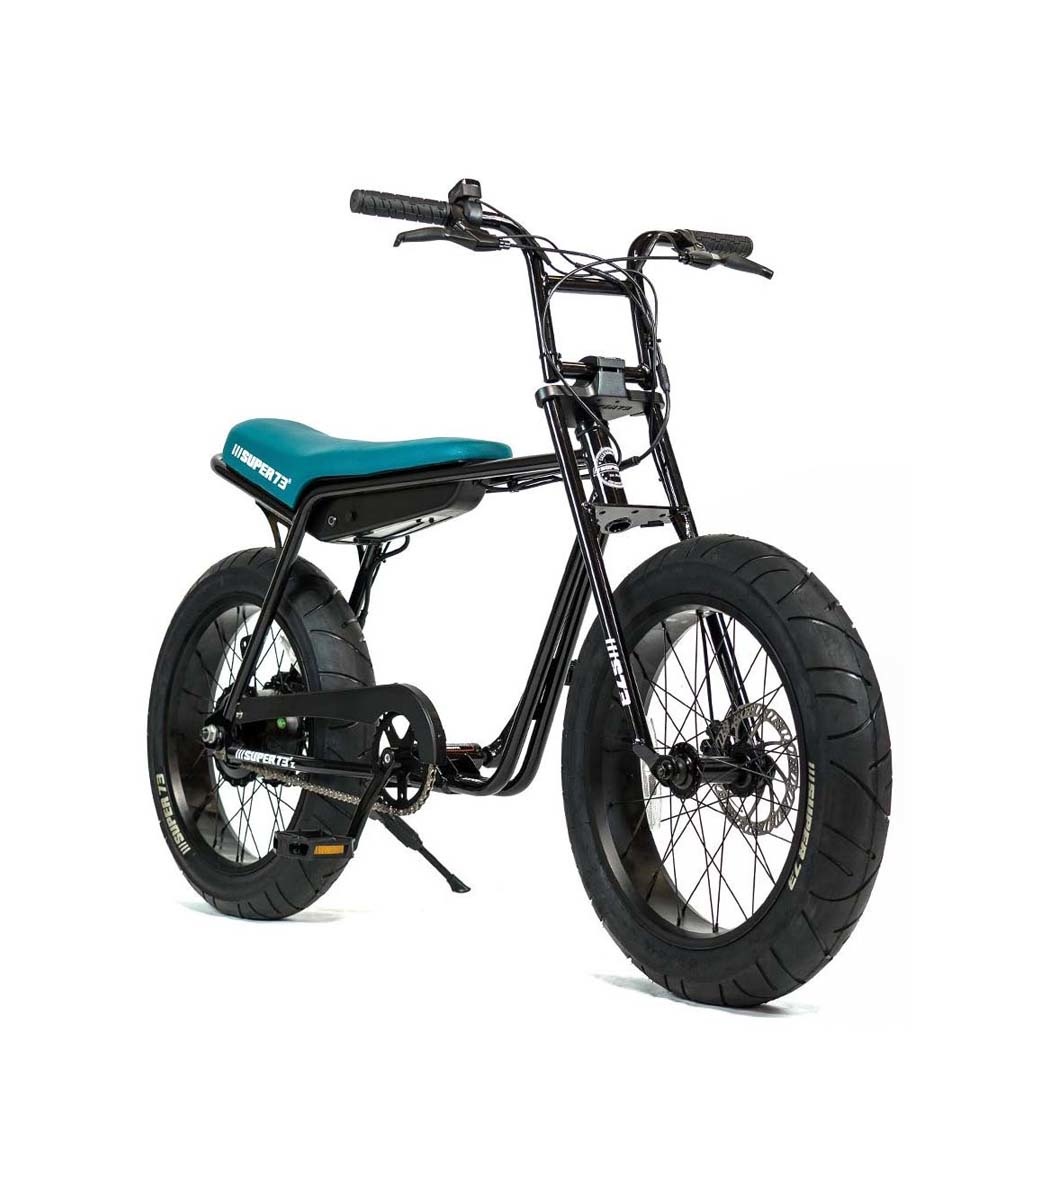 SUPER73-ZG Jet Black The SUPER73-ZG is perfect for exploring the city. The compact frame and the EPAC 250W internal hub motor make an excellent vehicle for anyone who wants the superior feeling of a regular SUPER73 with a smaller frame.